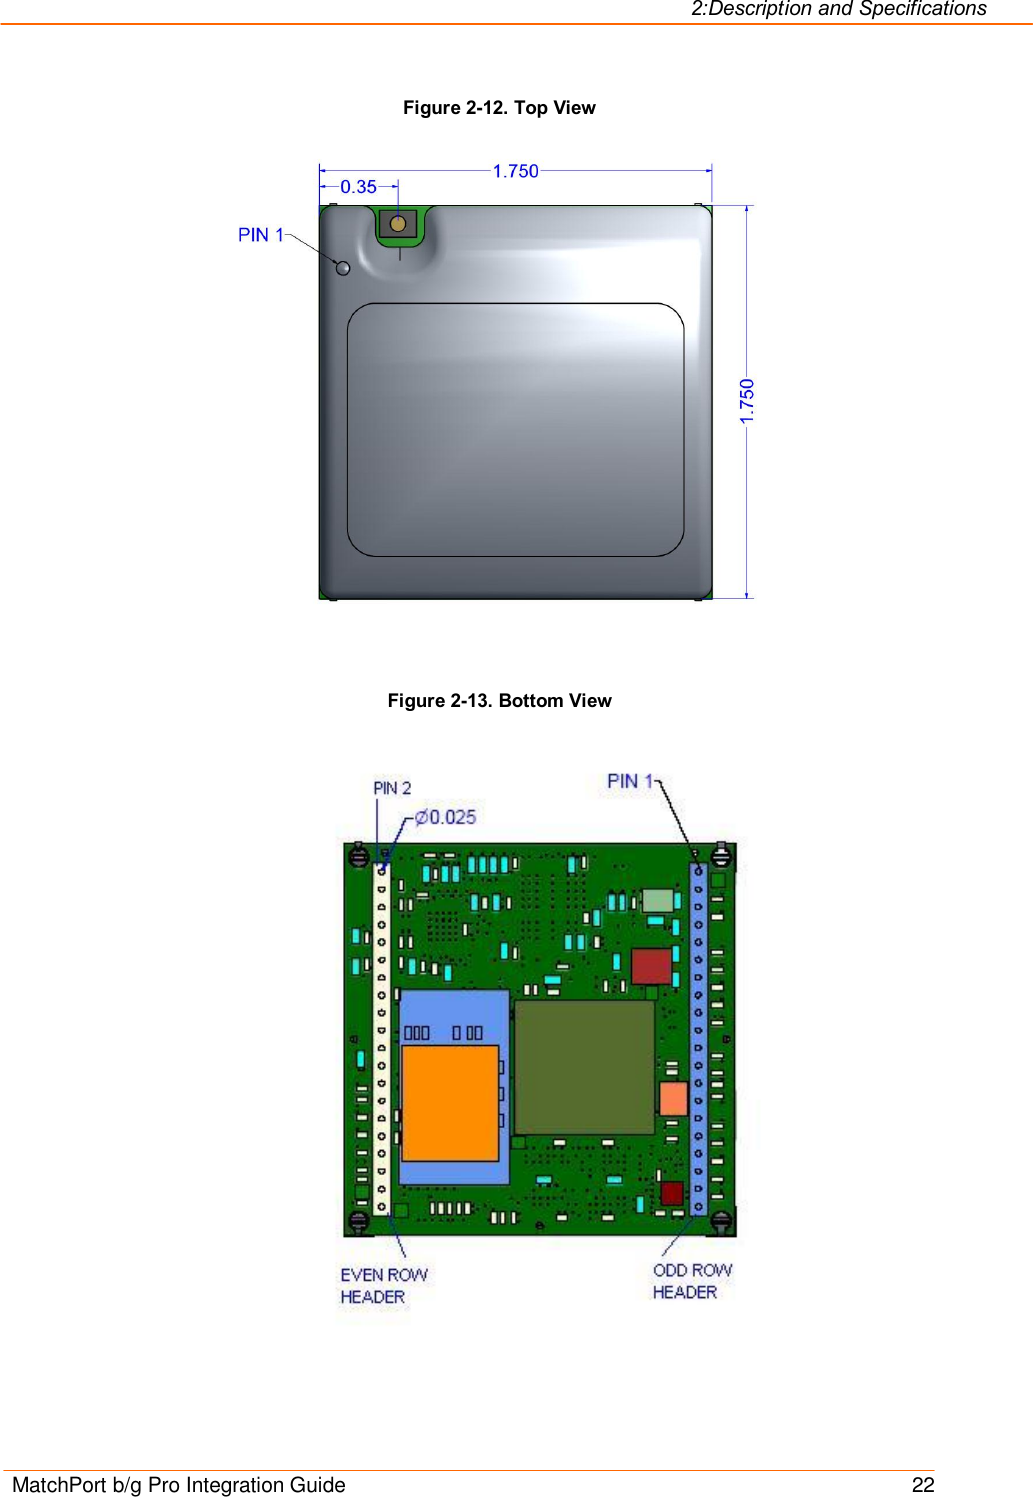 2:Description and Specifications MatchPort b/g Pro Integration Guide    22 Figure 2-12. Top View   Figure 2-13. Bottom View    